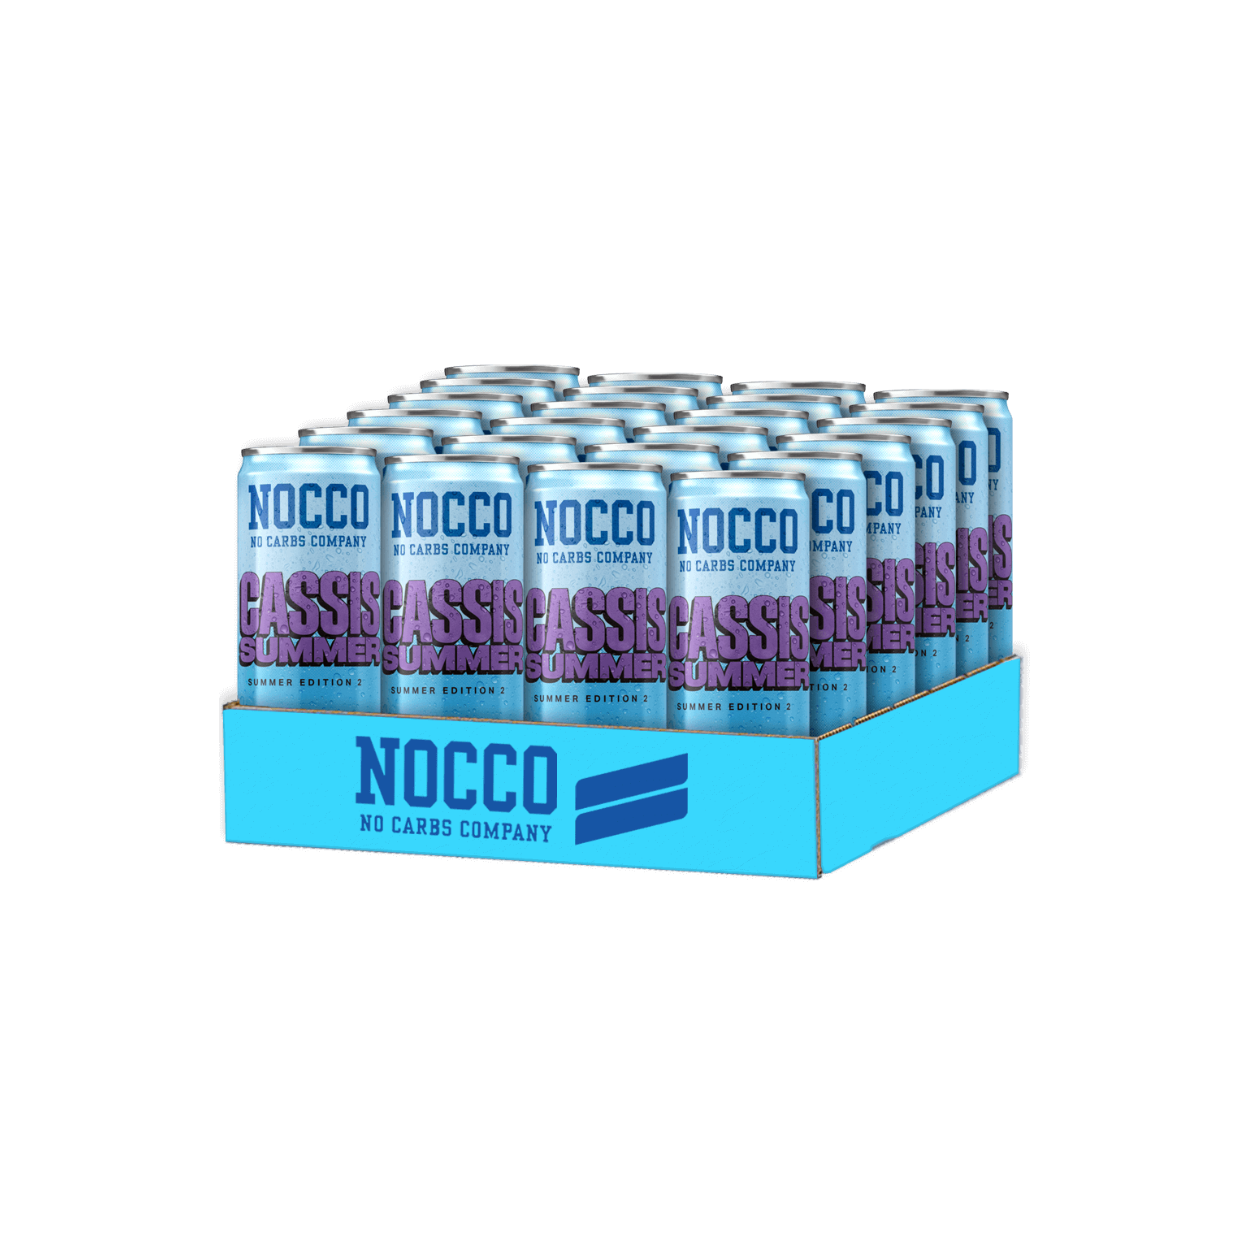 Nocco Cassis Summer Dose (1-24x330ml)